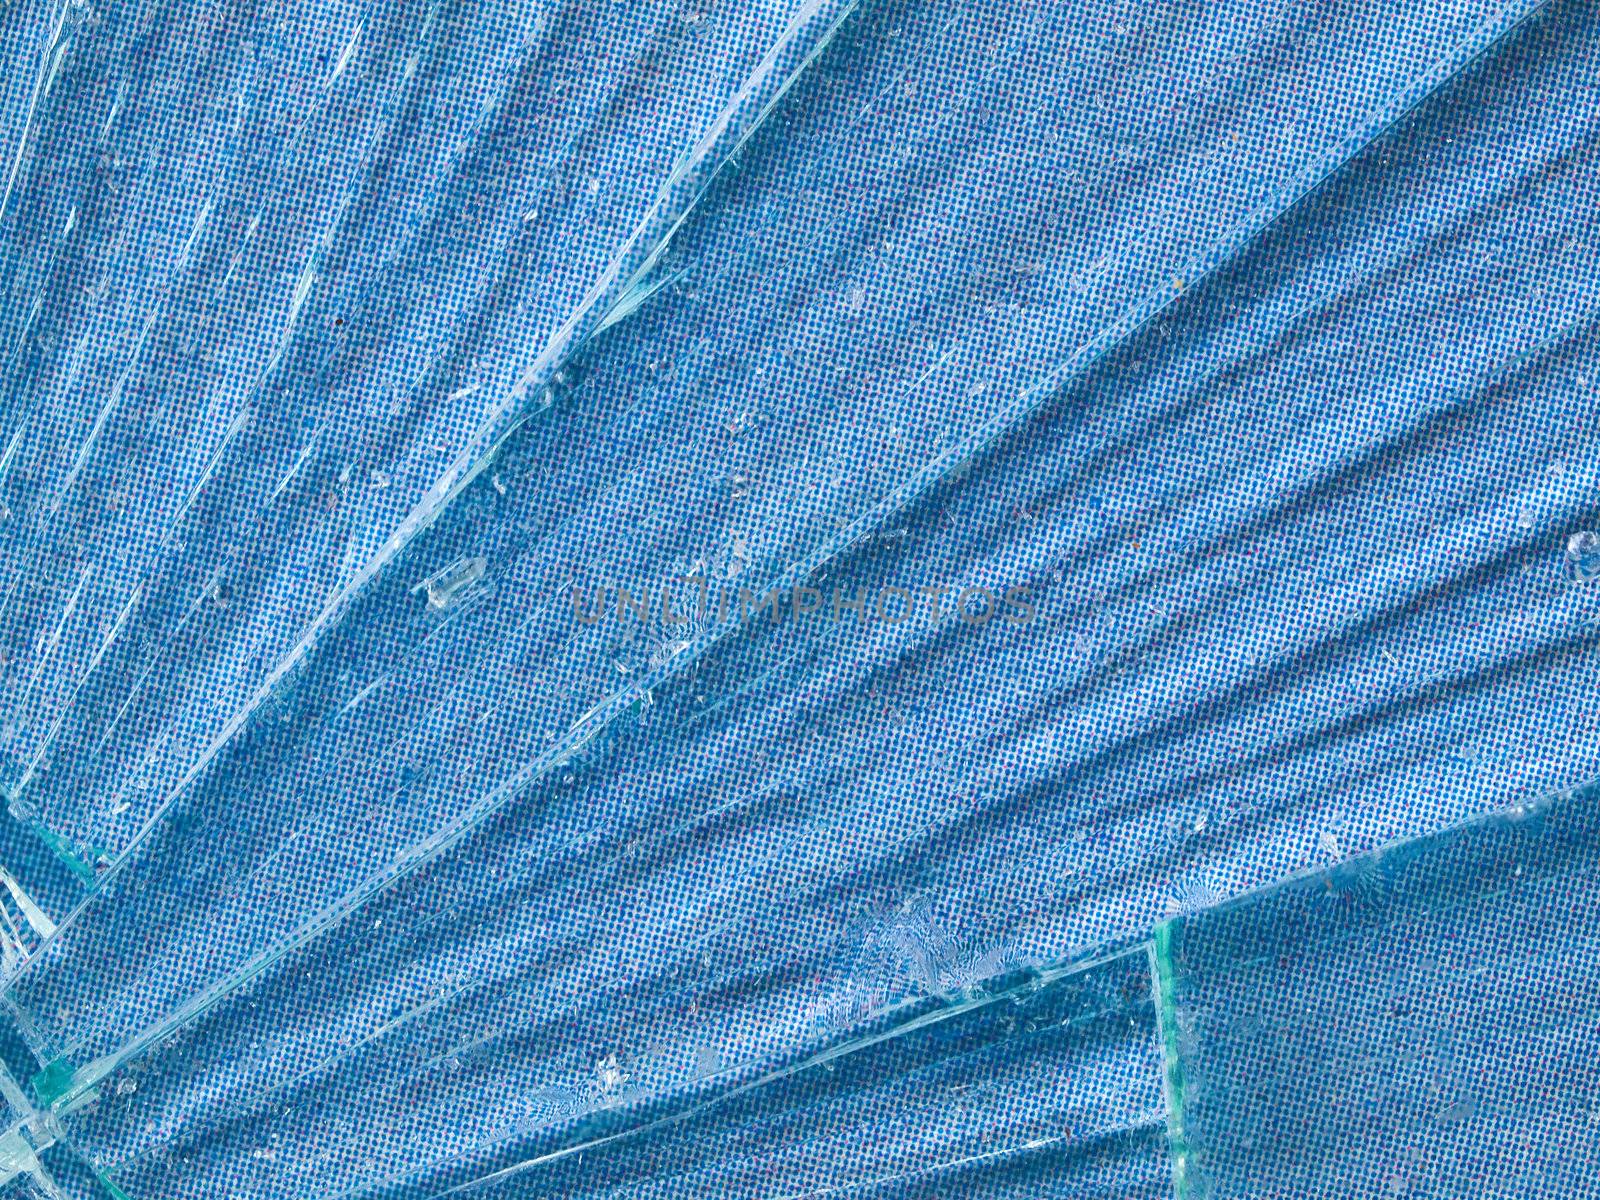 Cracked Glass Macro with a Sky Blue Patterned Background